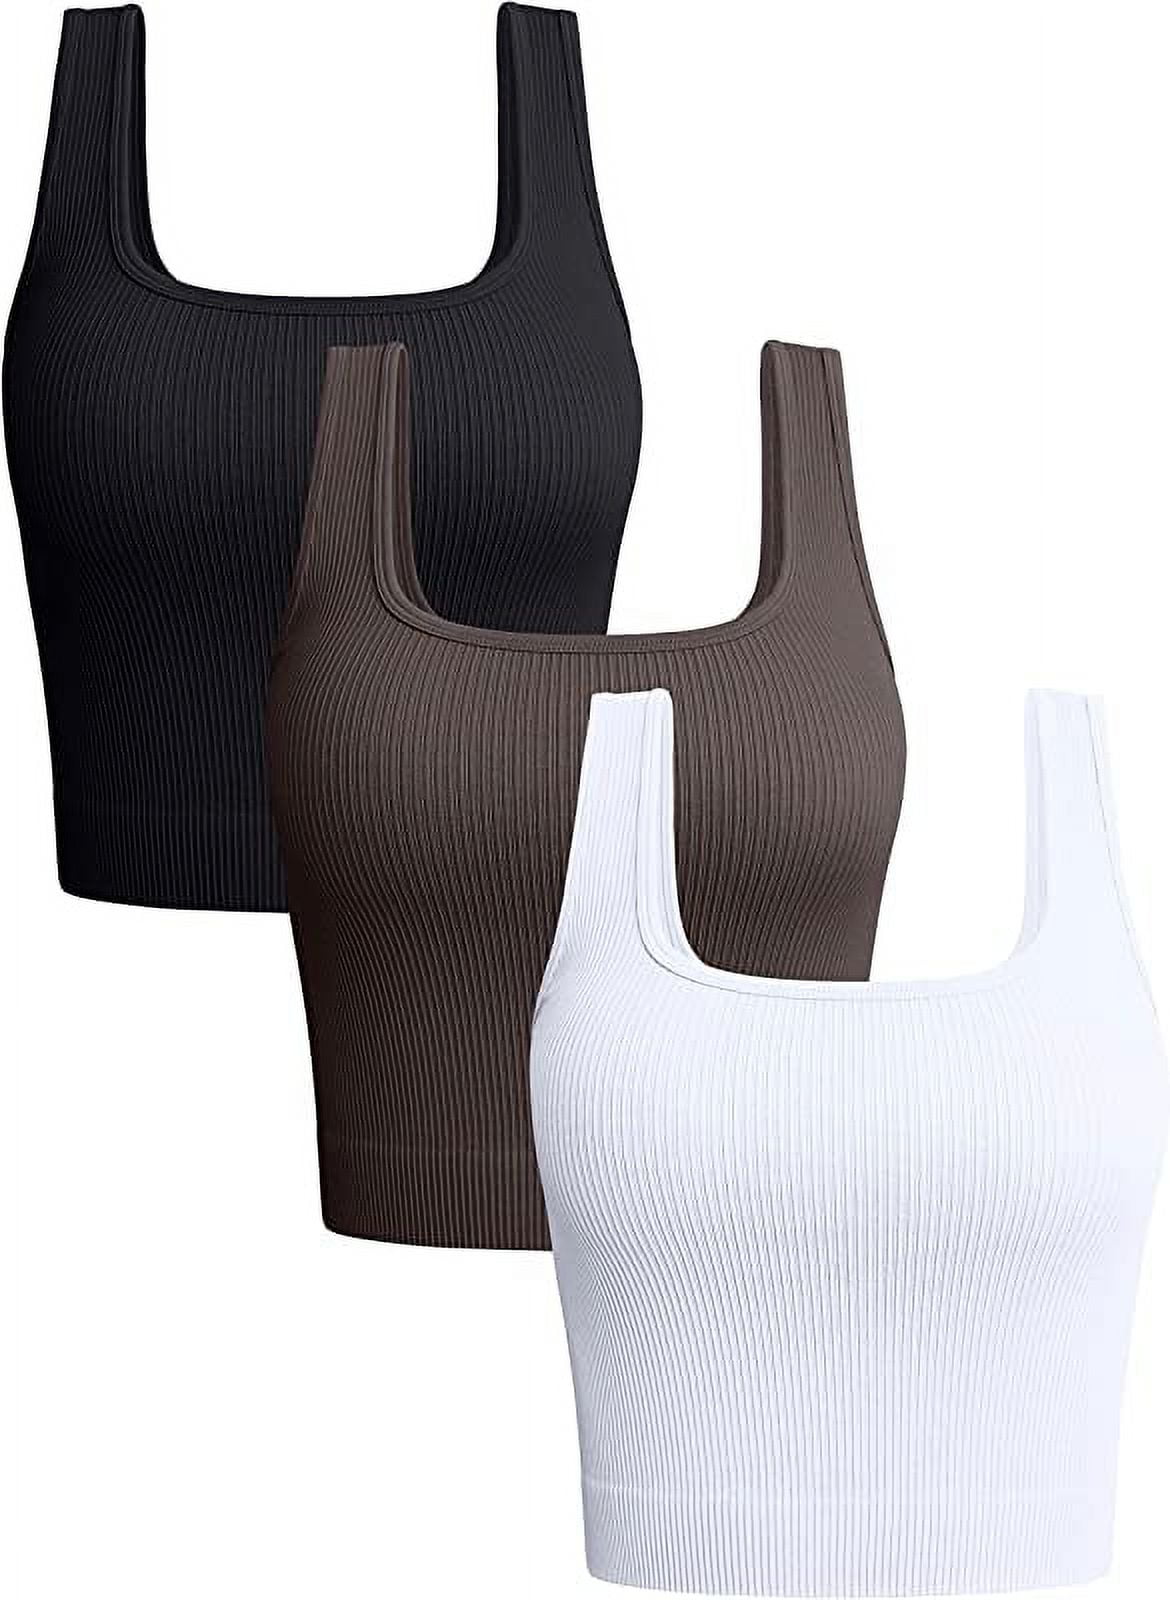 OQQ Women's 3 Piece Tank Tops Ribbed Seamless Workout